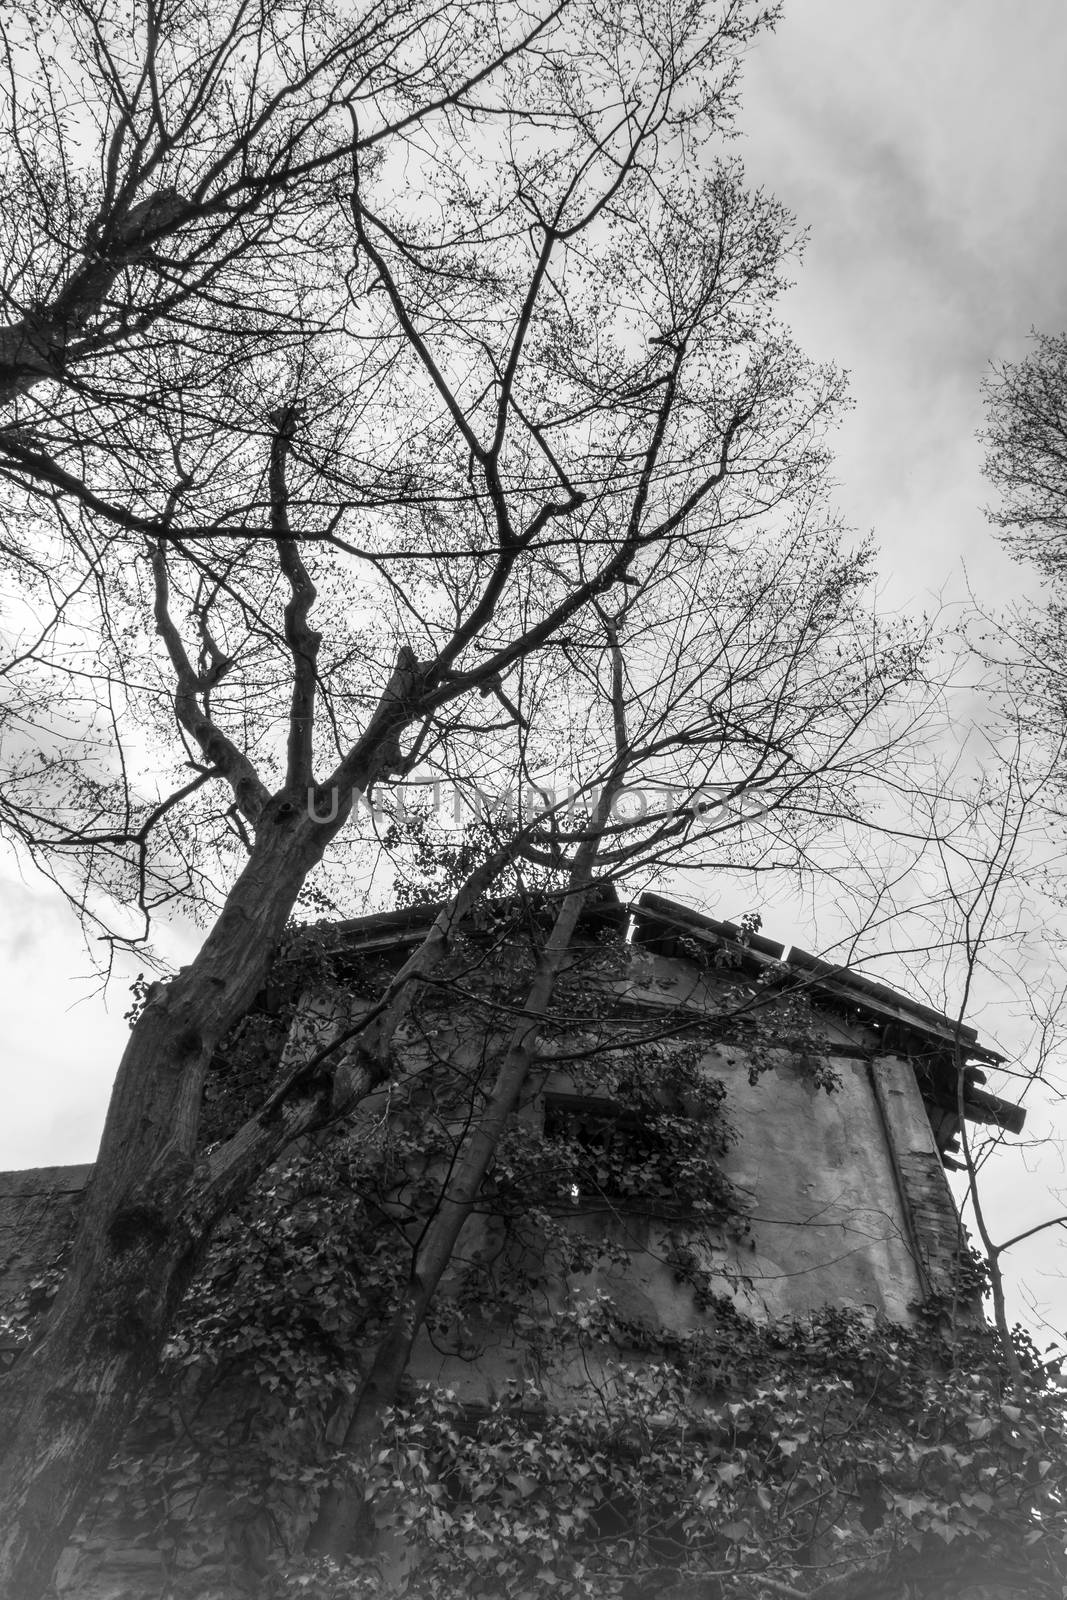 Abandoned old horror house in italy. Around trees, and nature takes over.